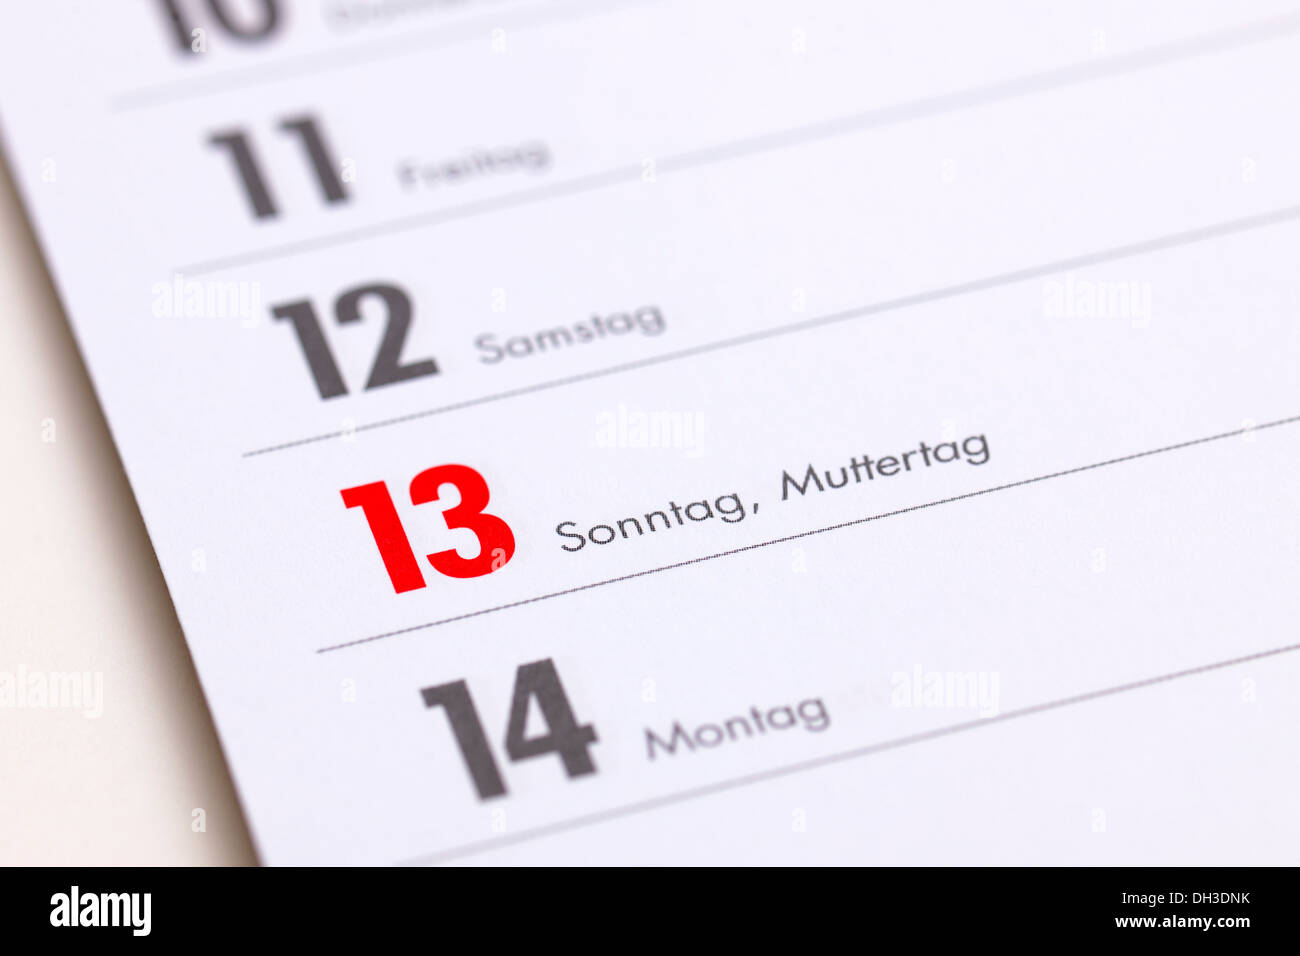 German appointment calendar, Muttertag, Mother's Day Stock Photo